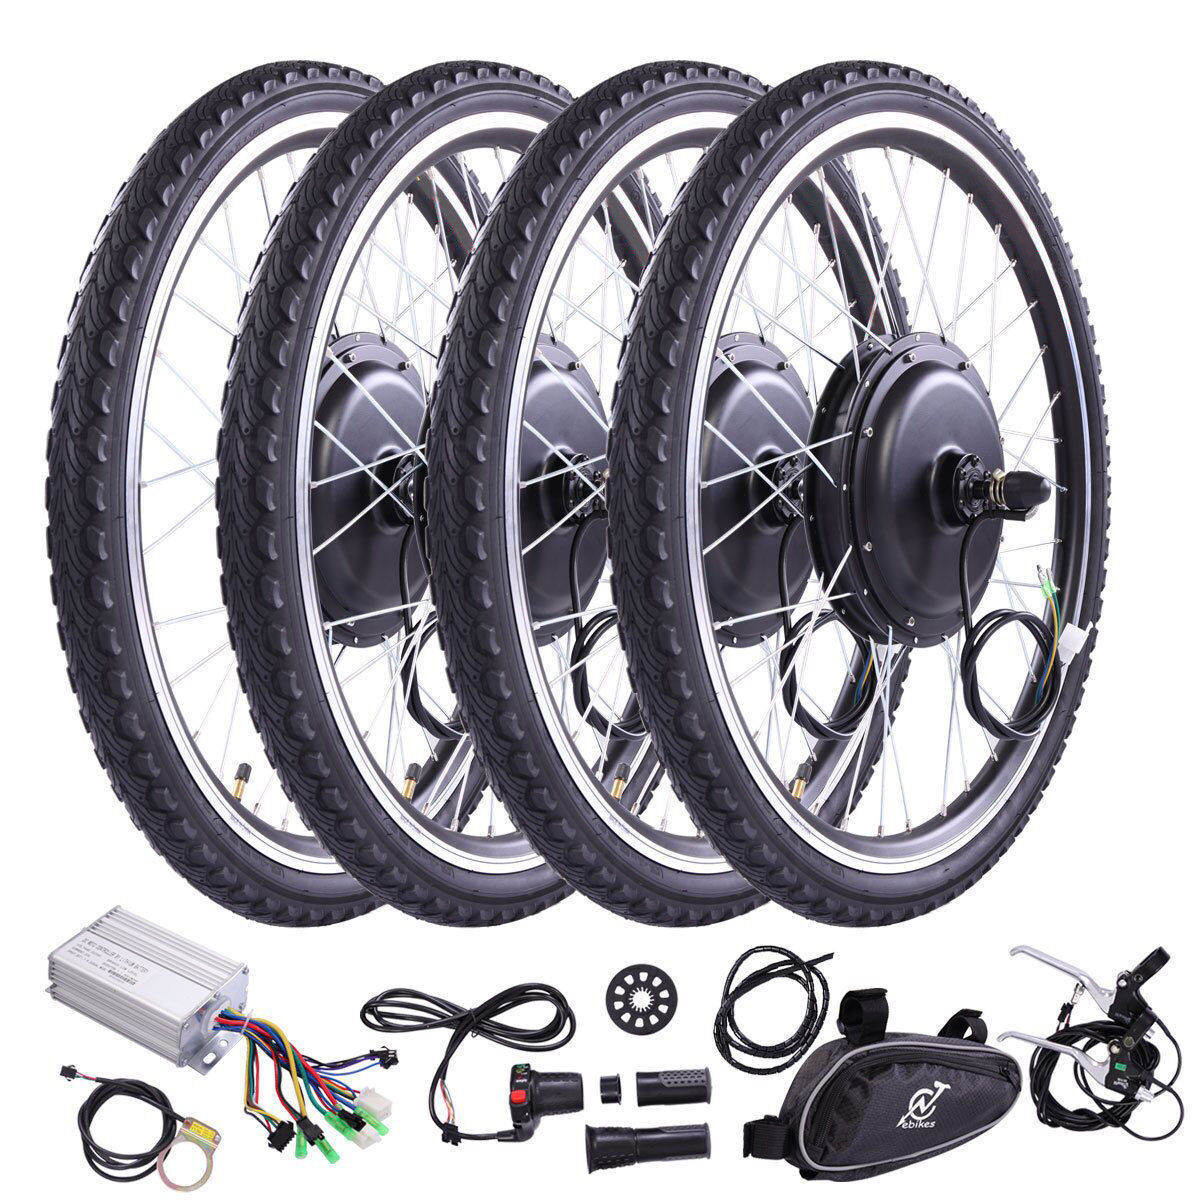 9 Amazing Electric Motor Kit For Bicycle for 2023